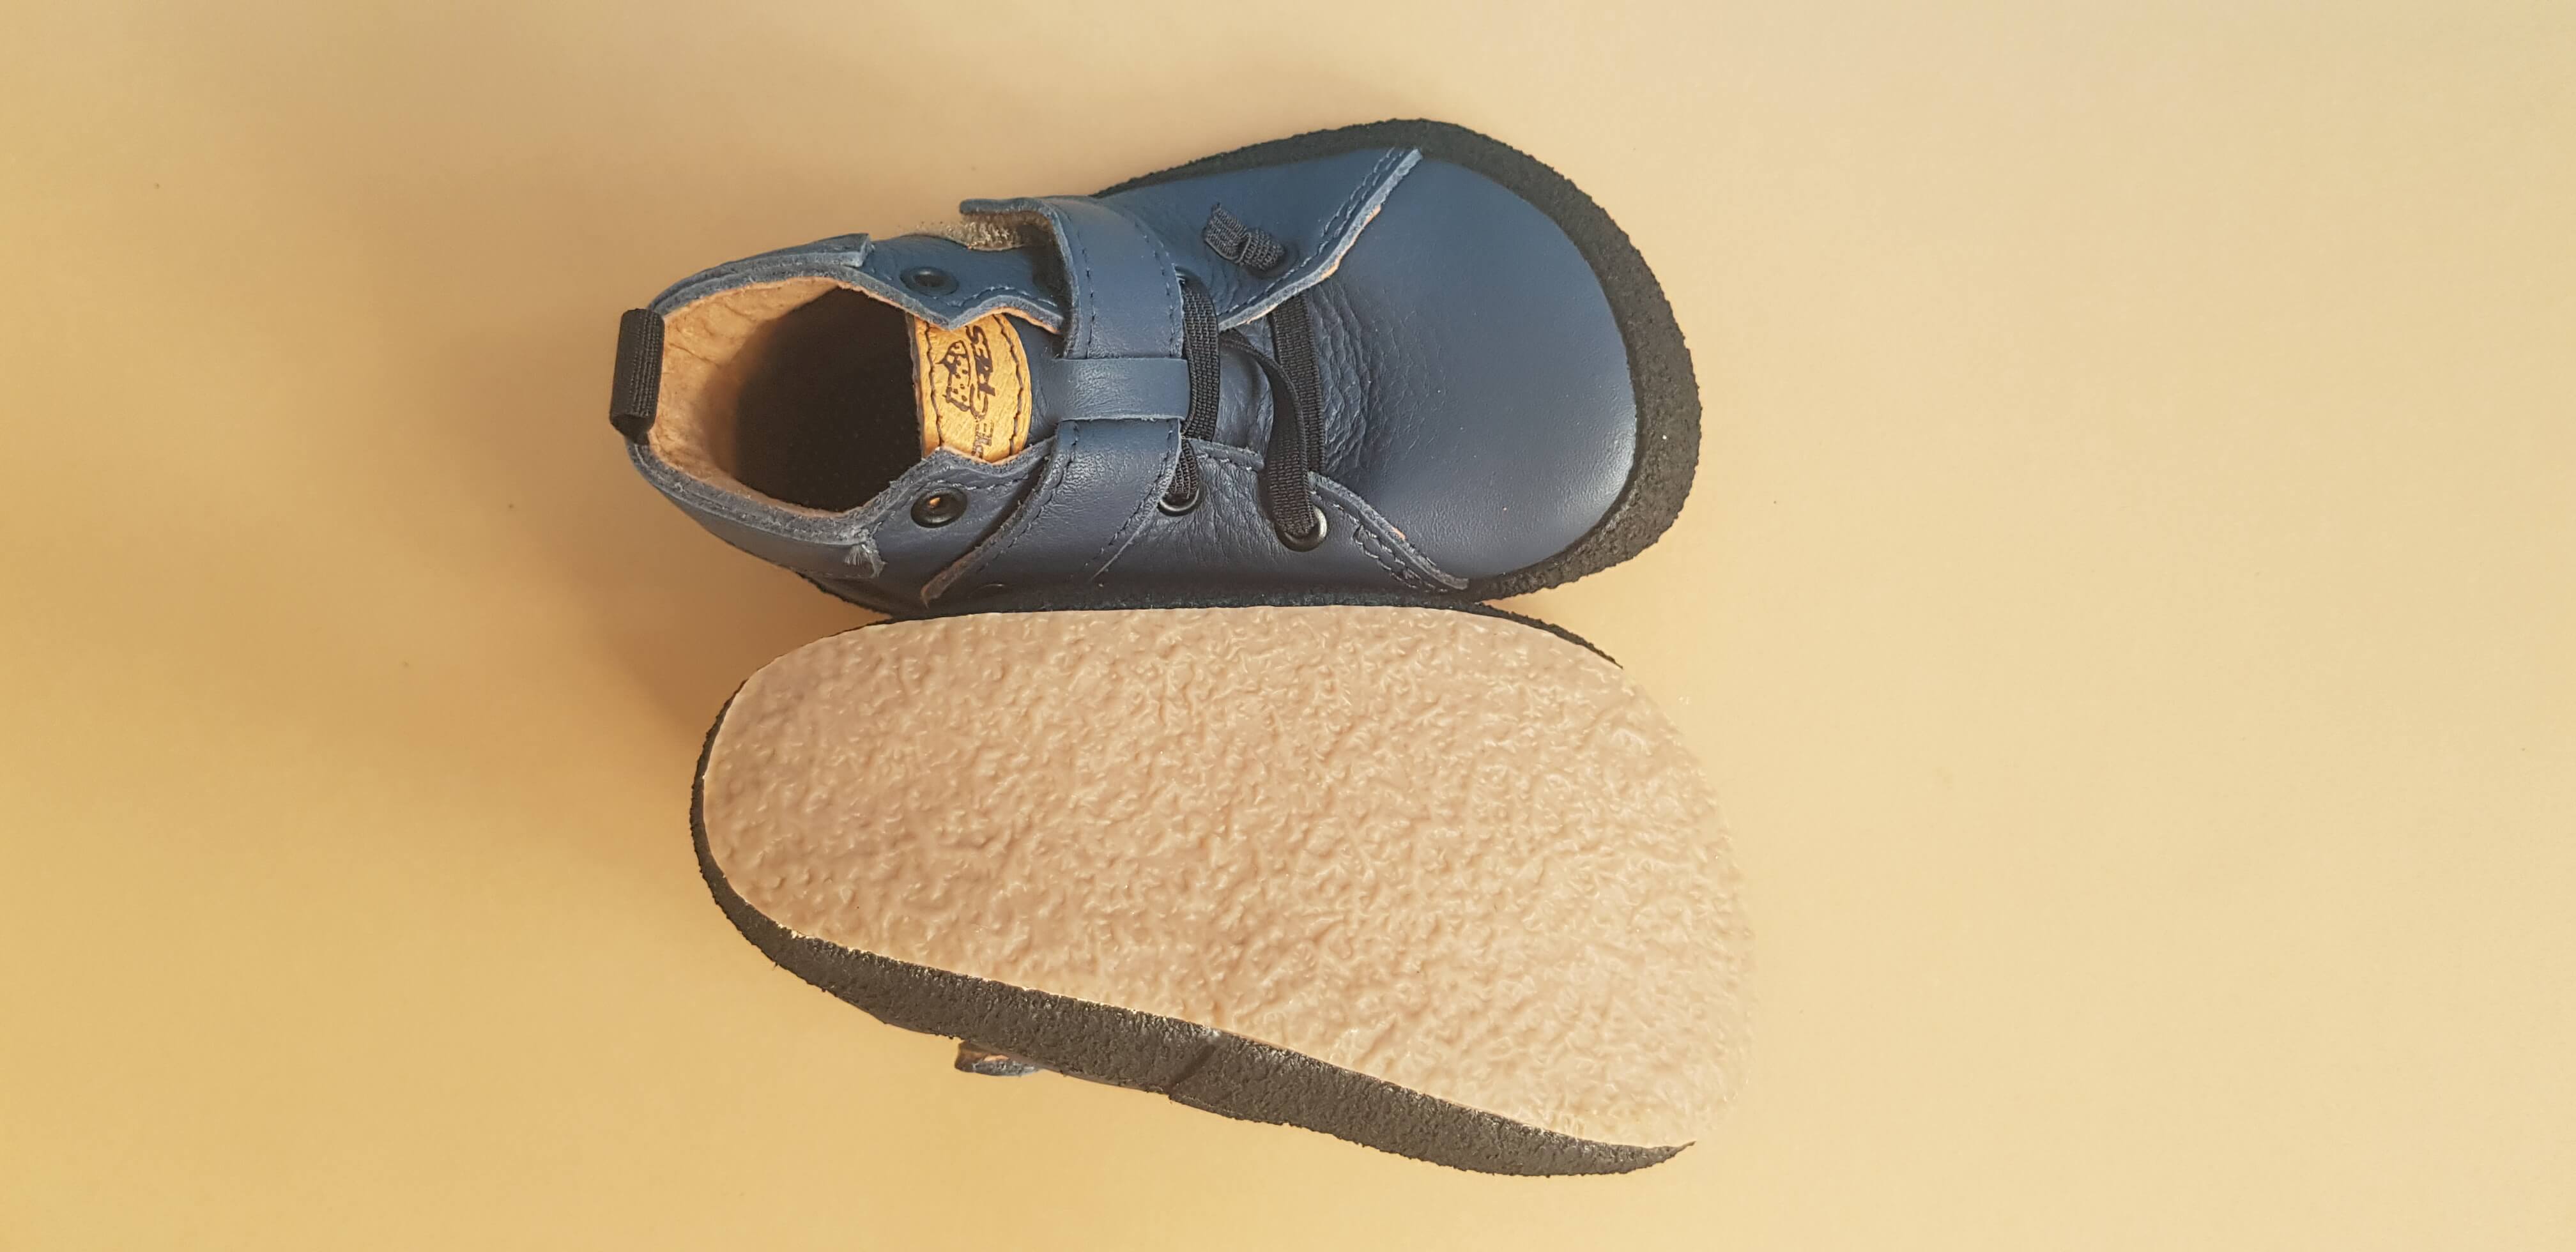 Barefoot Anatomically shaped Preschool shoes - Navy